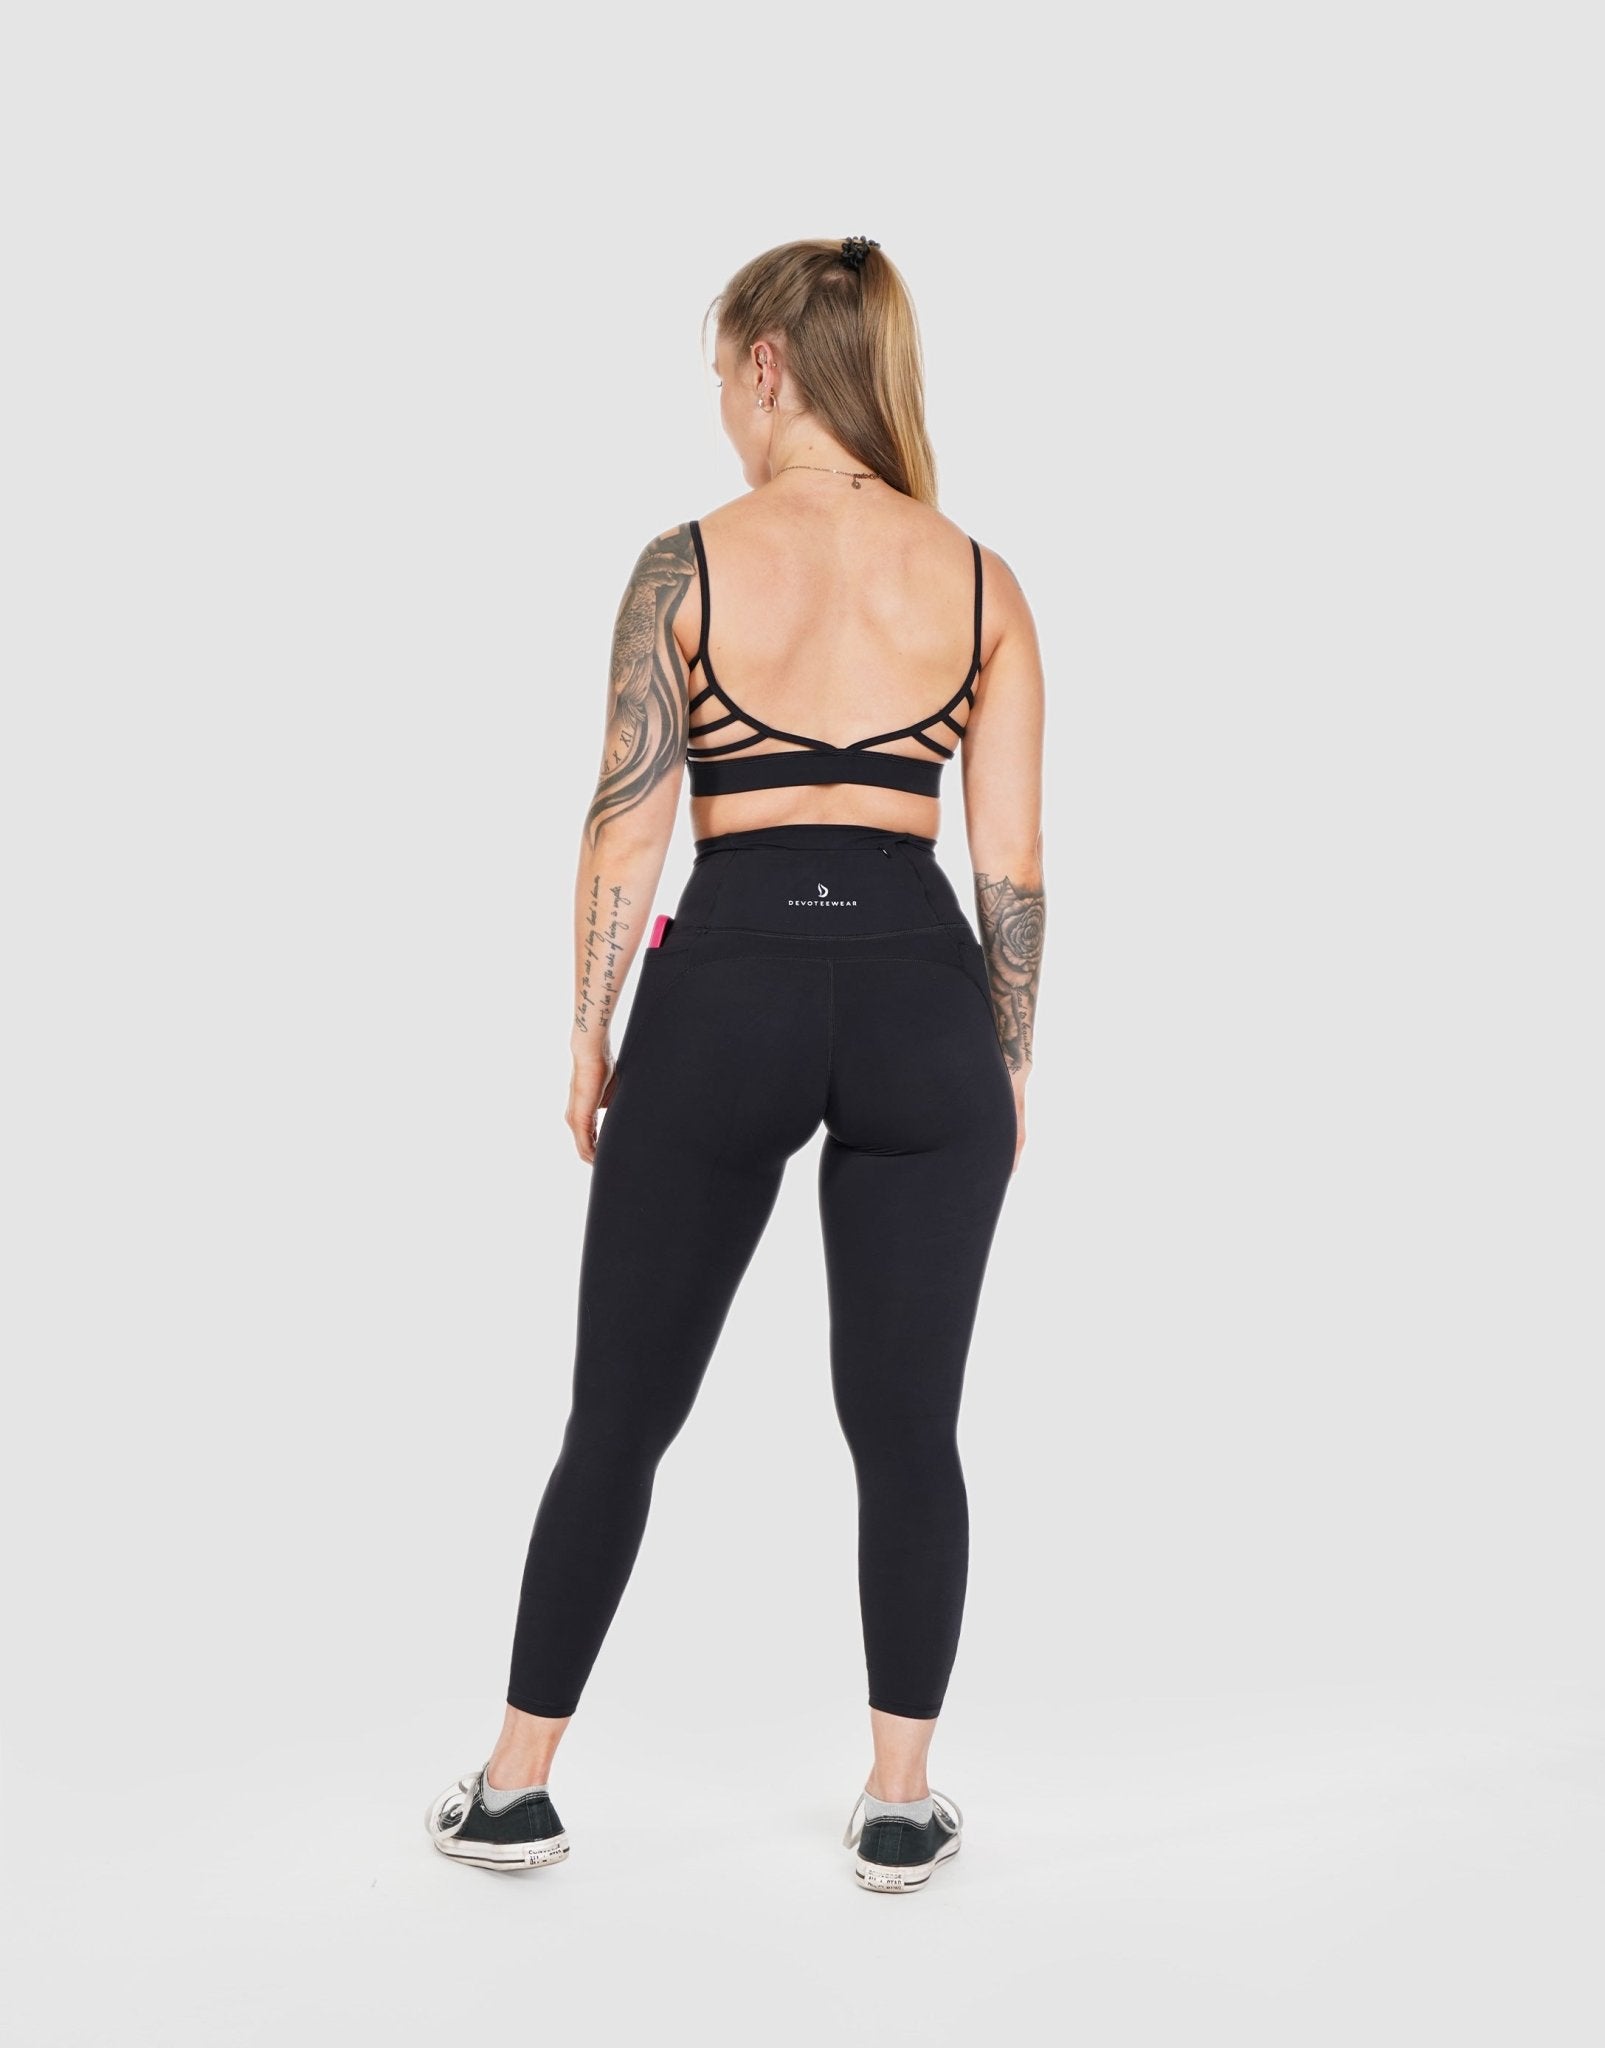 BETTER OFF ACTIVE POCKETED LEGGING – RAOK boutique